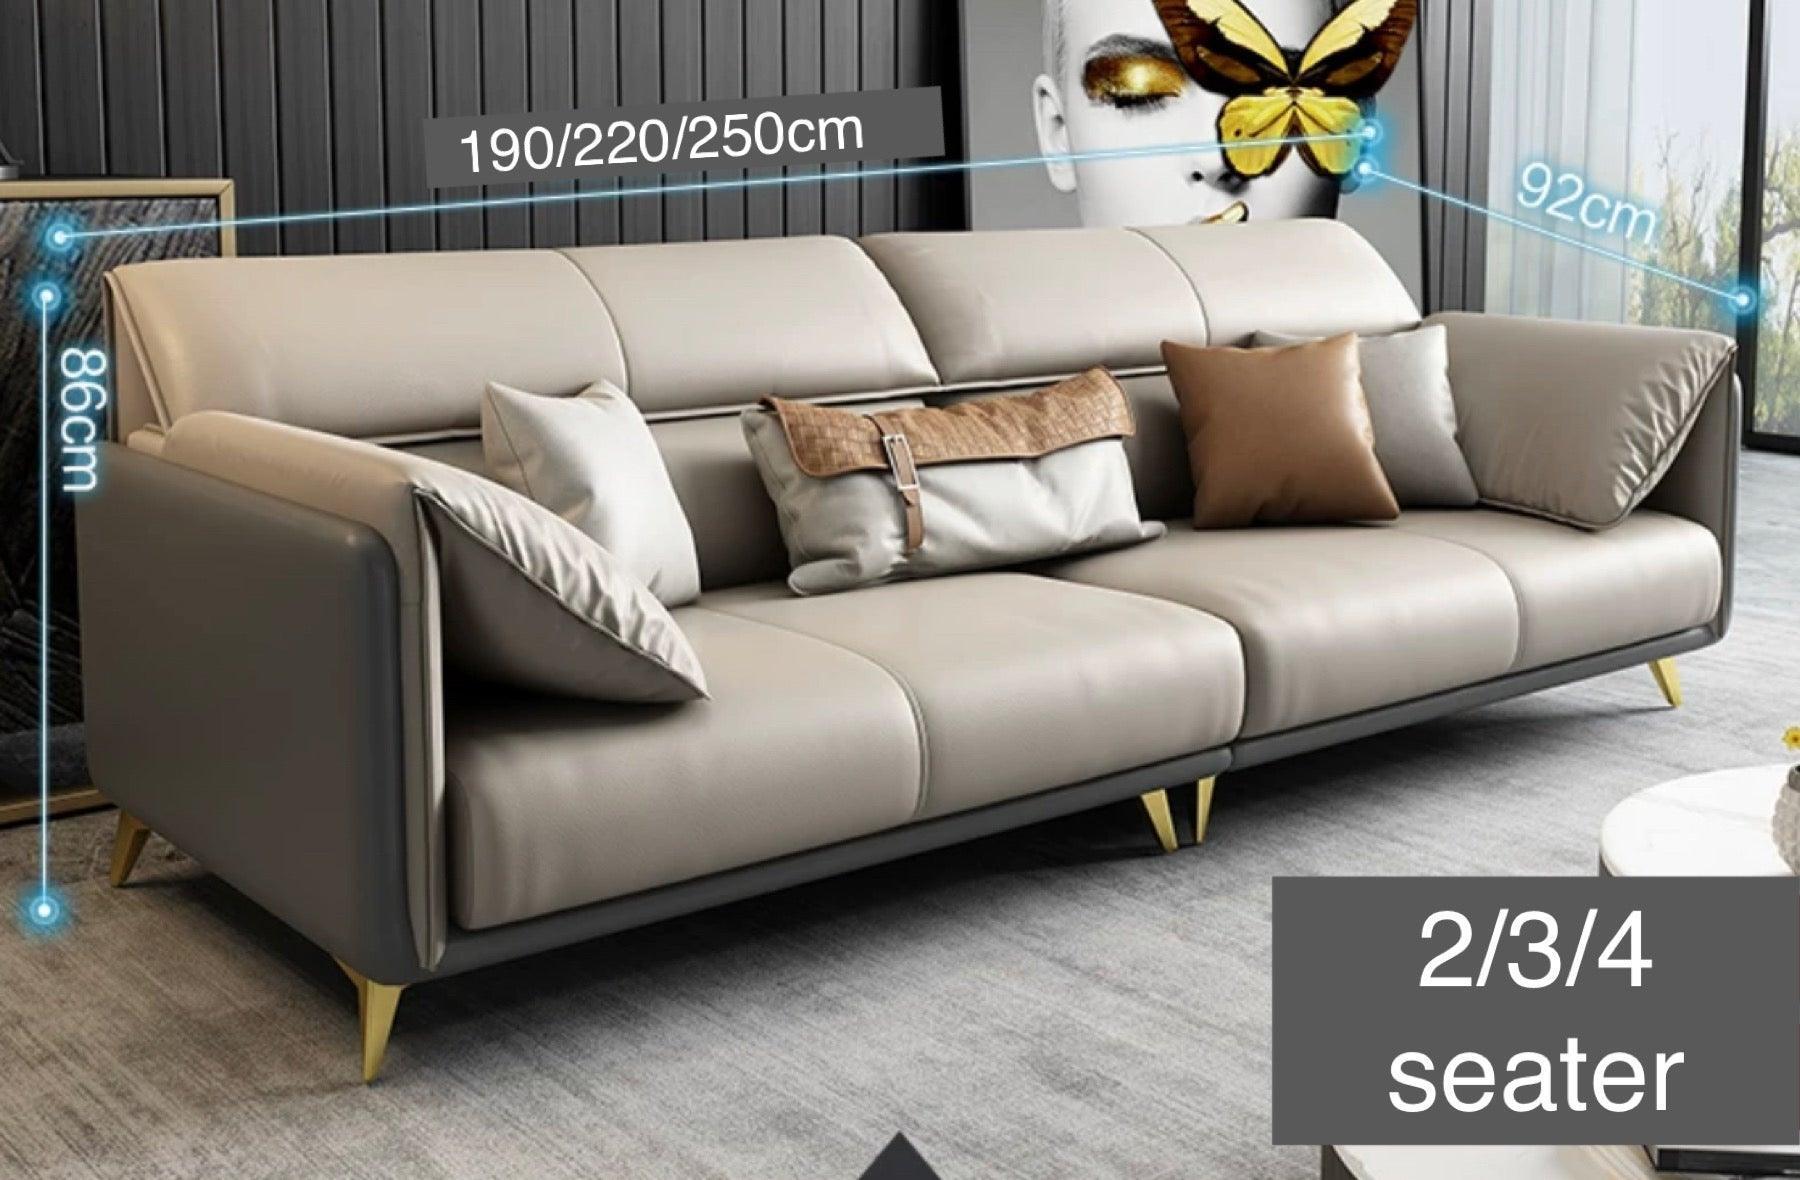 home-atelier-f31a Italian Genuine Cowhide Leather / 2 seater/ Length 190cm / Camel Caston Sectional Leather Sofa